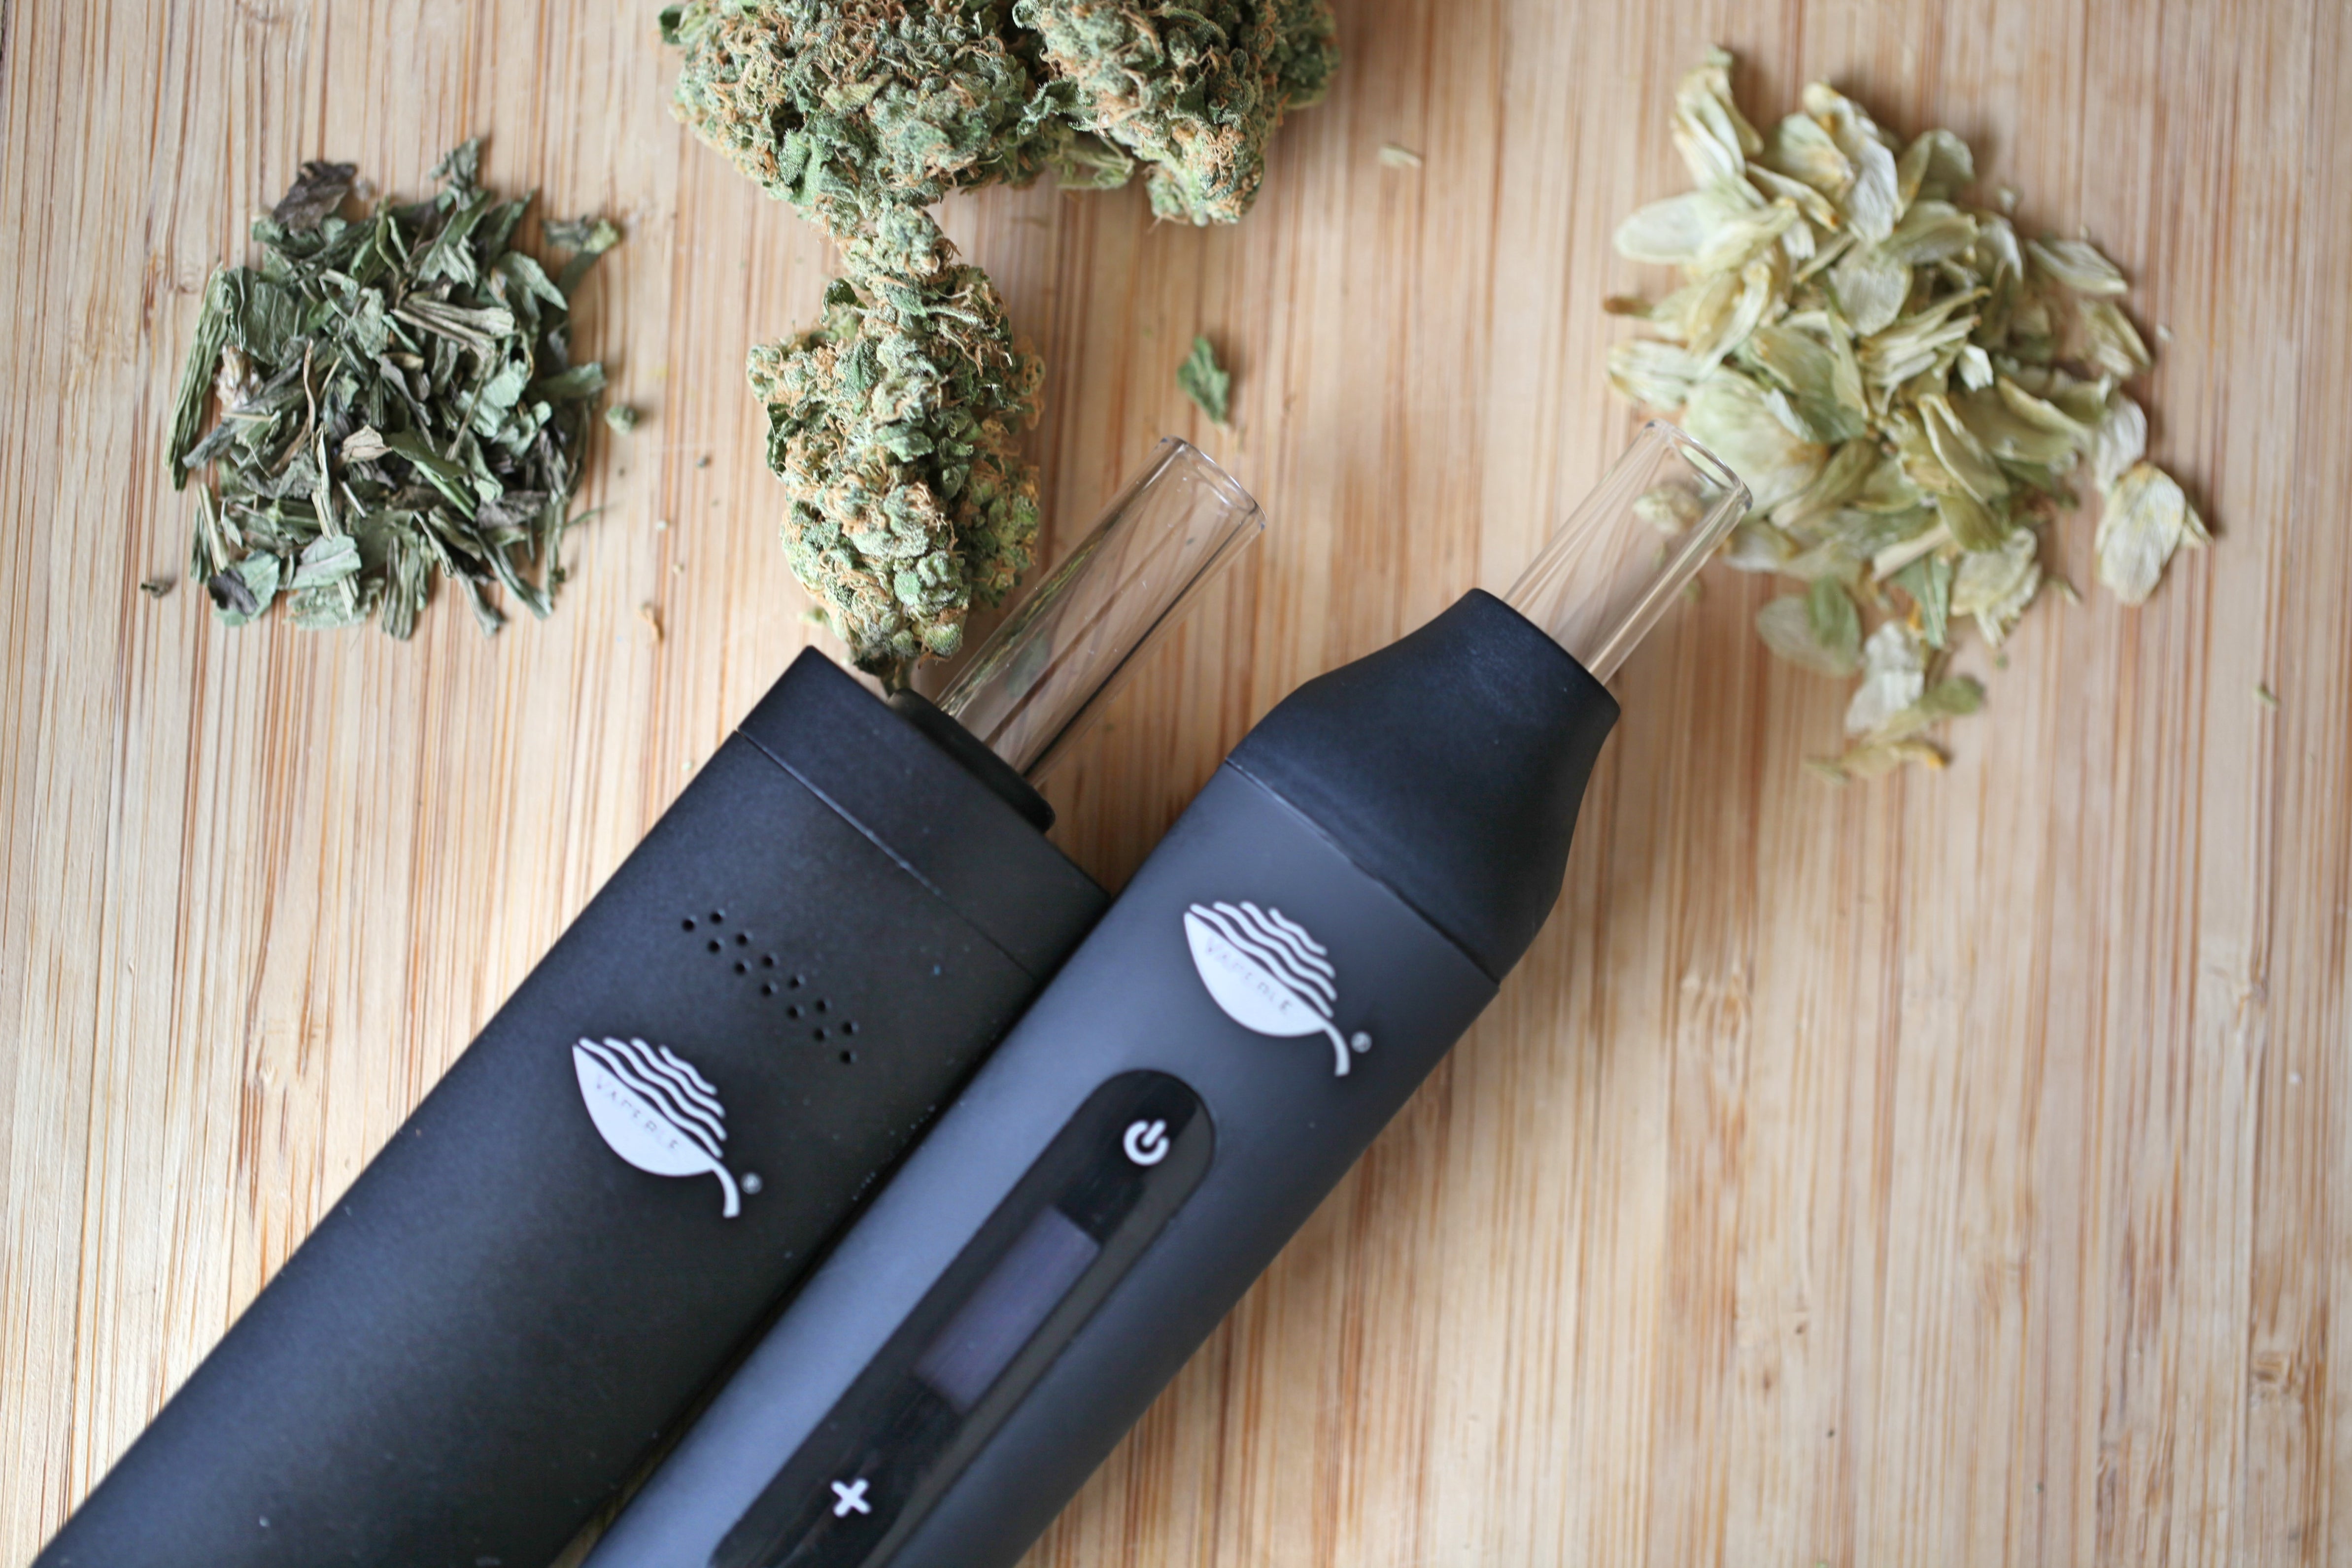 Best strains for vaping in march 2019